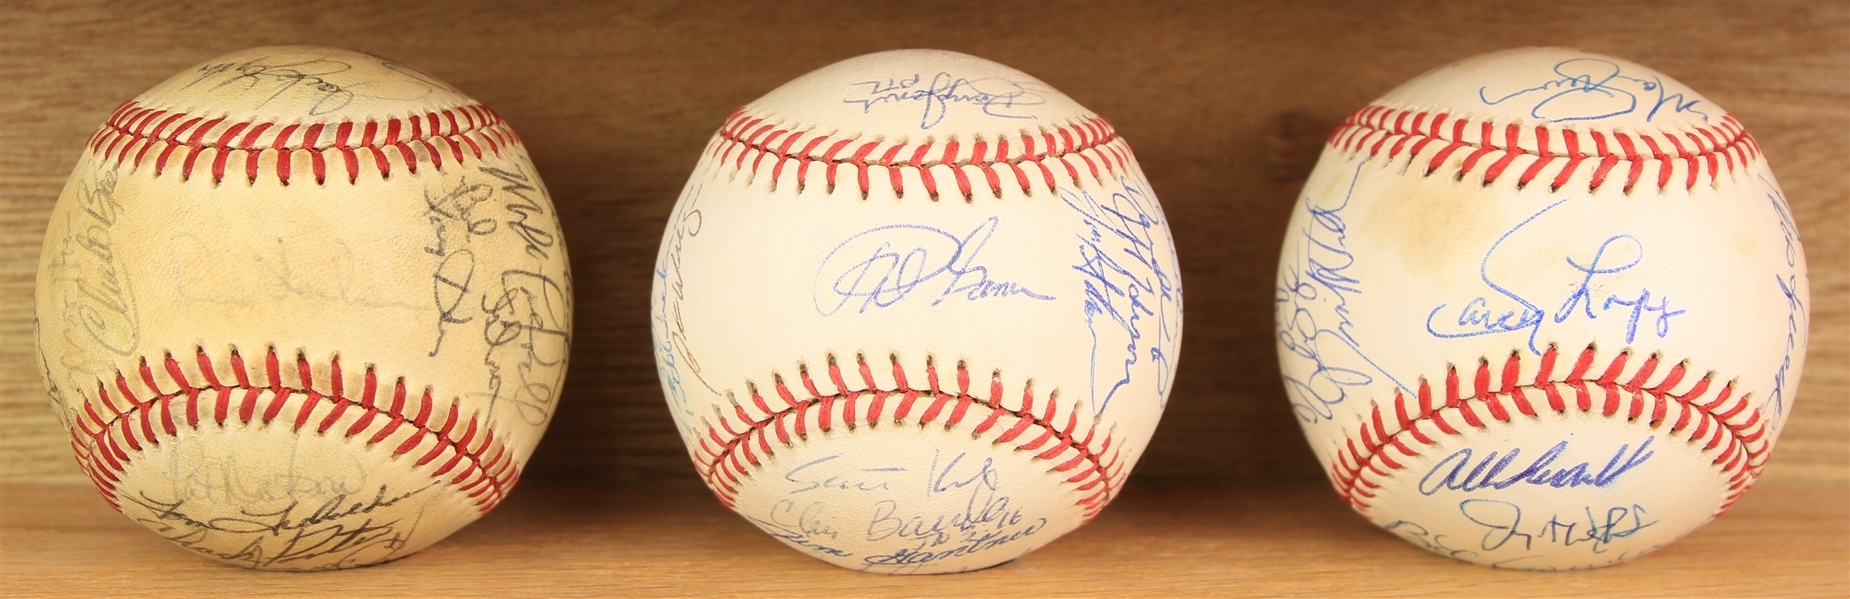 1985-2000 Milwaukee Brewers Team Signed Baseballs - Lot of 3 w/ Robin Yount, Don Sutton, Ted Simmons, Geoff Jenkins & More (JSA)